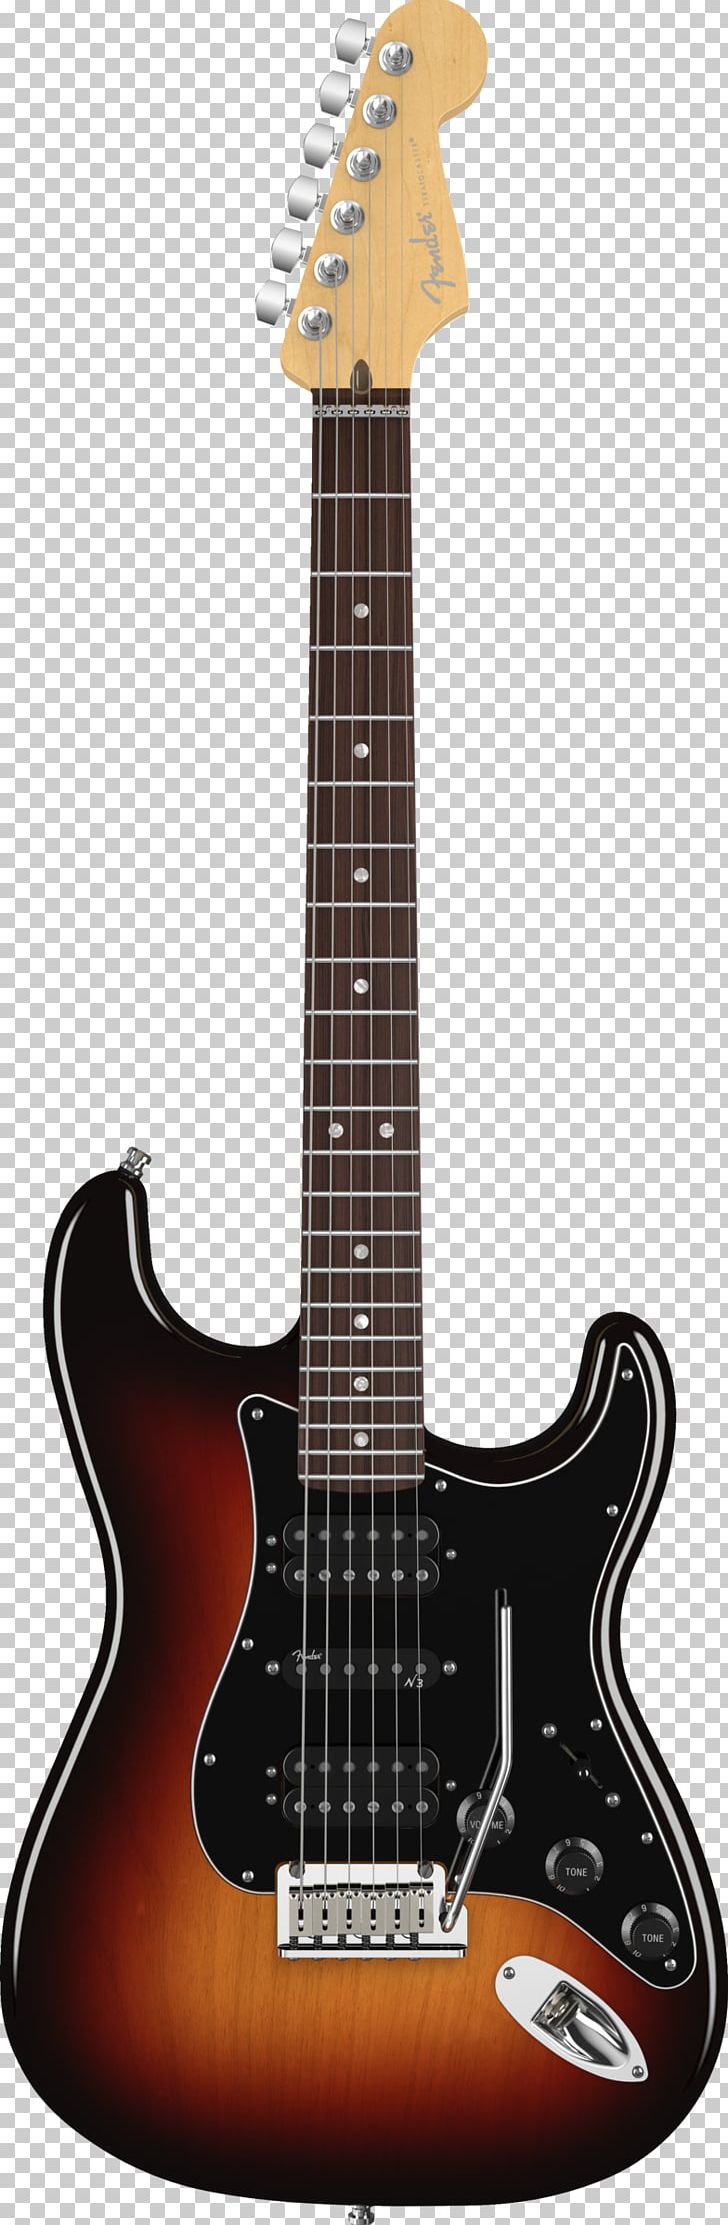 Fender Stratocaster Fender Musical Instruments Corporation Bass Guitar PNG, Clipart, Acoustic Electric Guitar, American, Guitar Accessory, Guitarist, Jazz Guitarist Free PNG Download